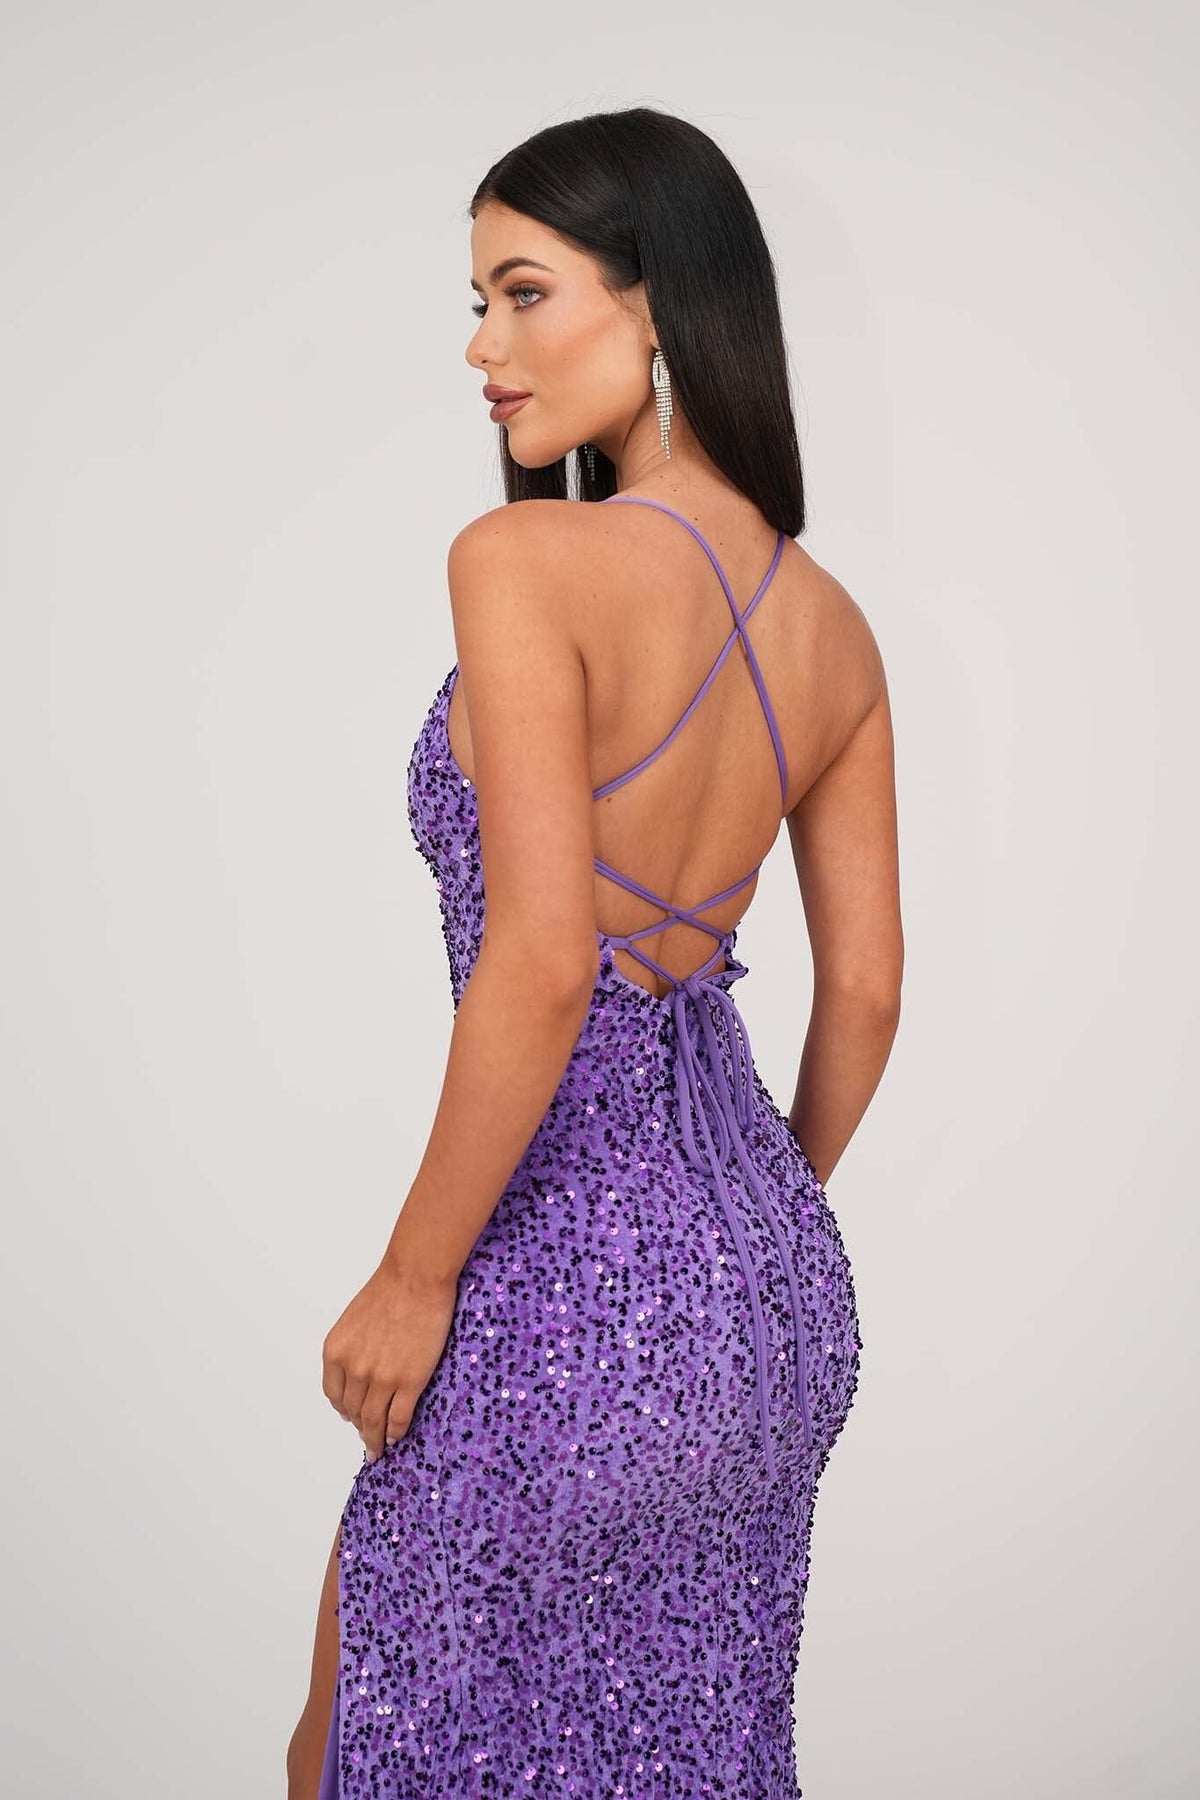 Lace Up Open Back of Purple Velvet Sequin Full Length Evening Gown with V Neckline, Thin Shoulder Straps and Thigh High Side Split